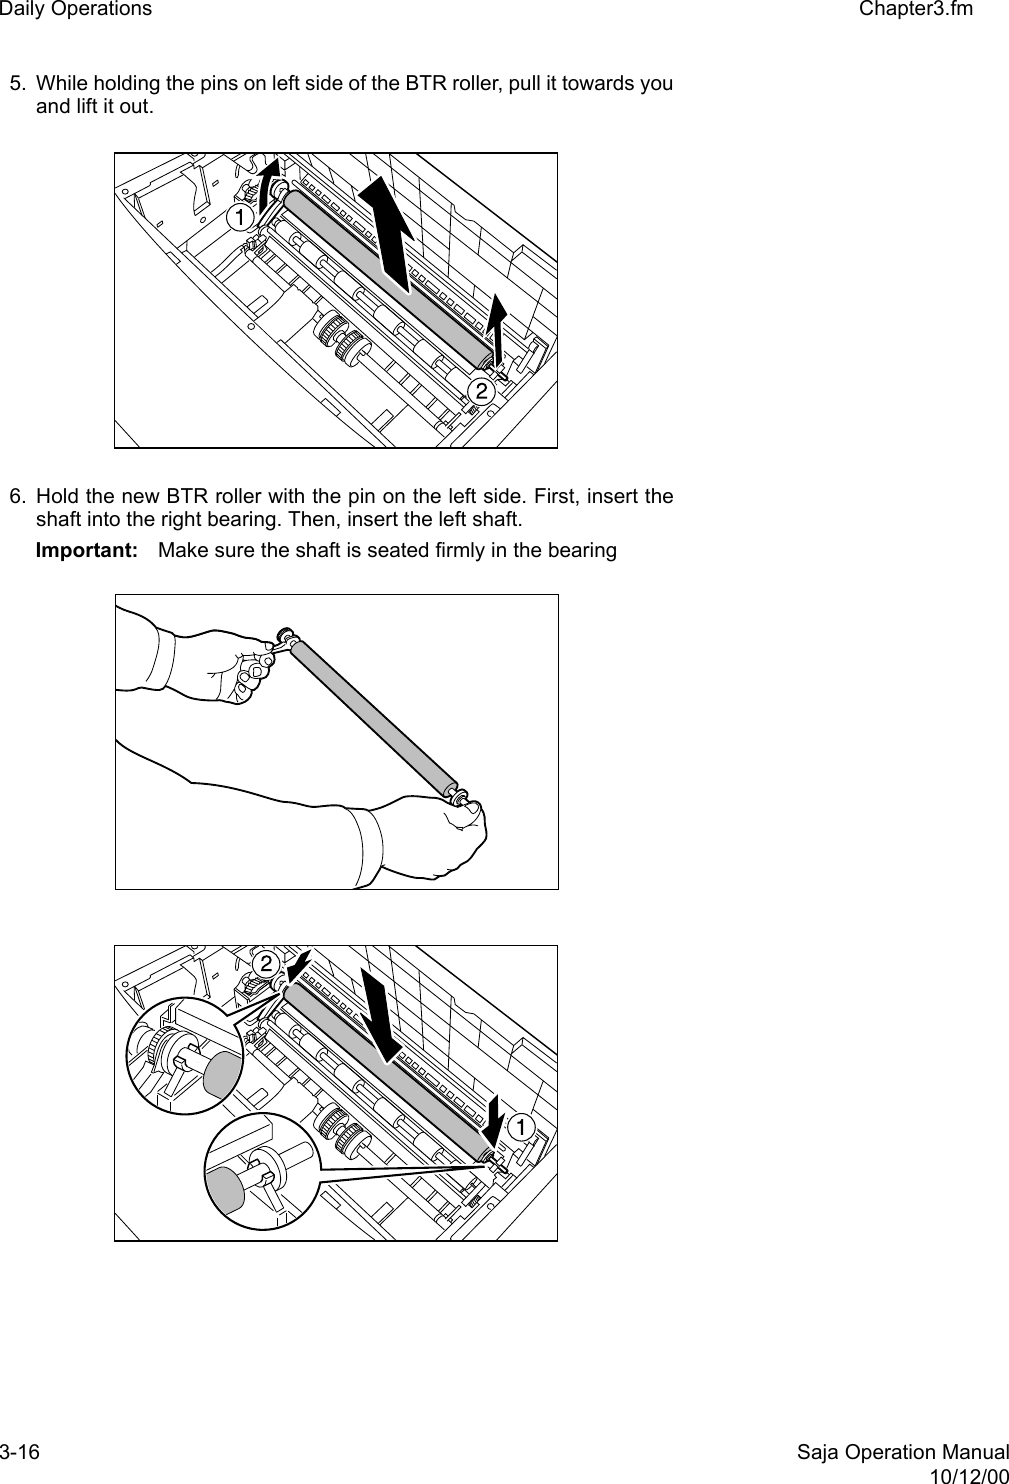 3-16 Saja Operation Manual10/12/00Daily Operations Chapter3.fm5. While holding the pins on left side of the BTR roller, pull it towards youand lift it out.6. Hold the new BTR roller with the pin on the left side. First, insert theshaft into the right bearing. Then, insert the left shaft.Important: Make sure the shaft is seated firmly in the bearing